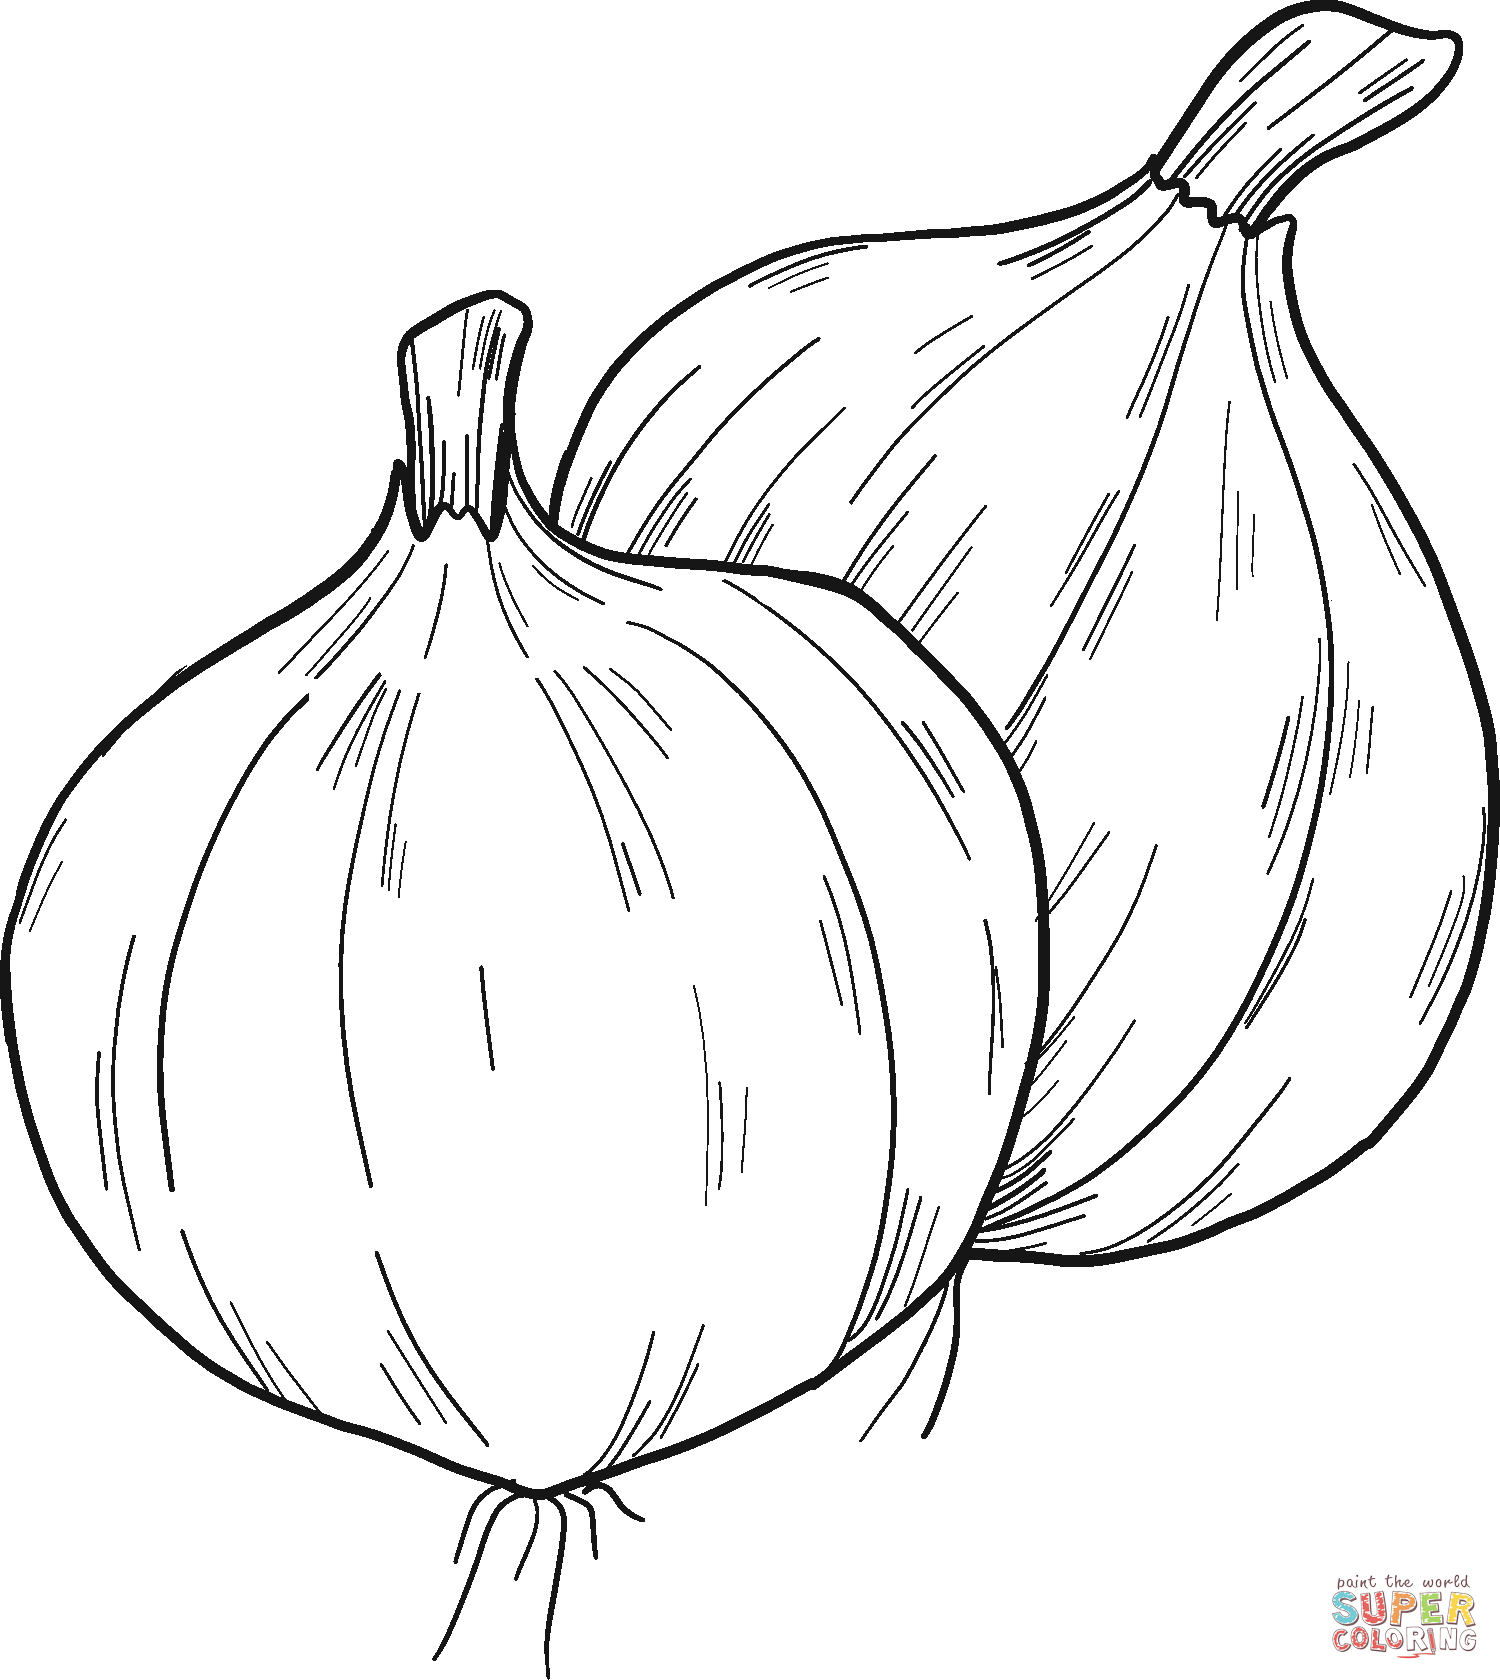 Onions coloring page free printable coloring pages